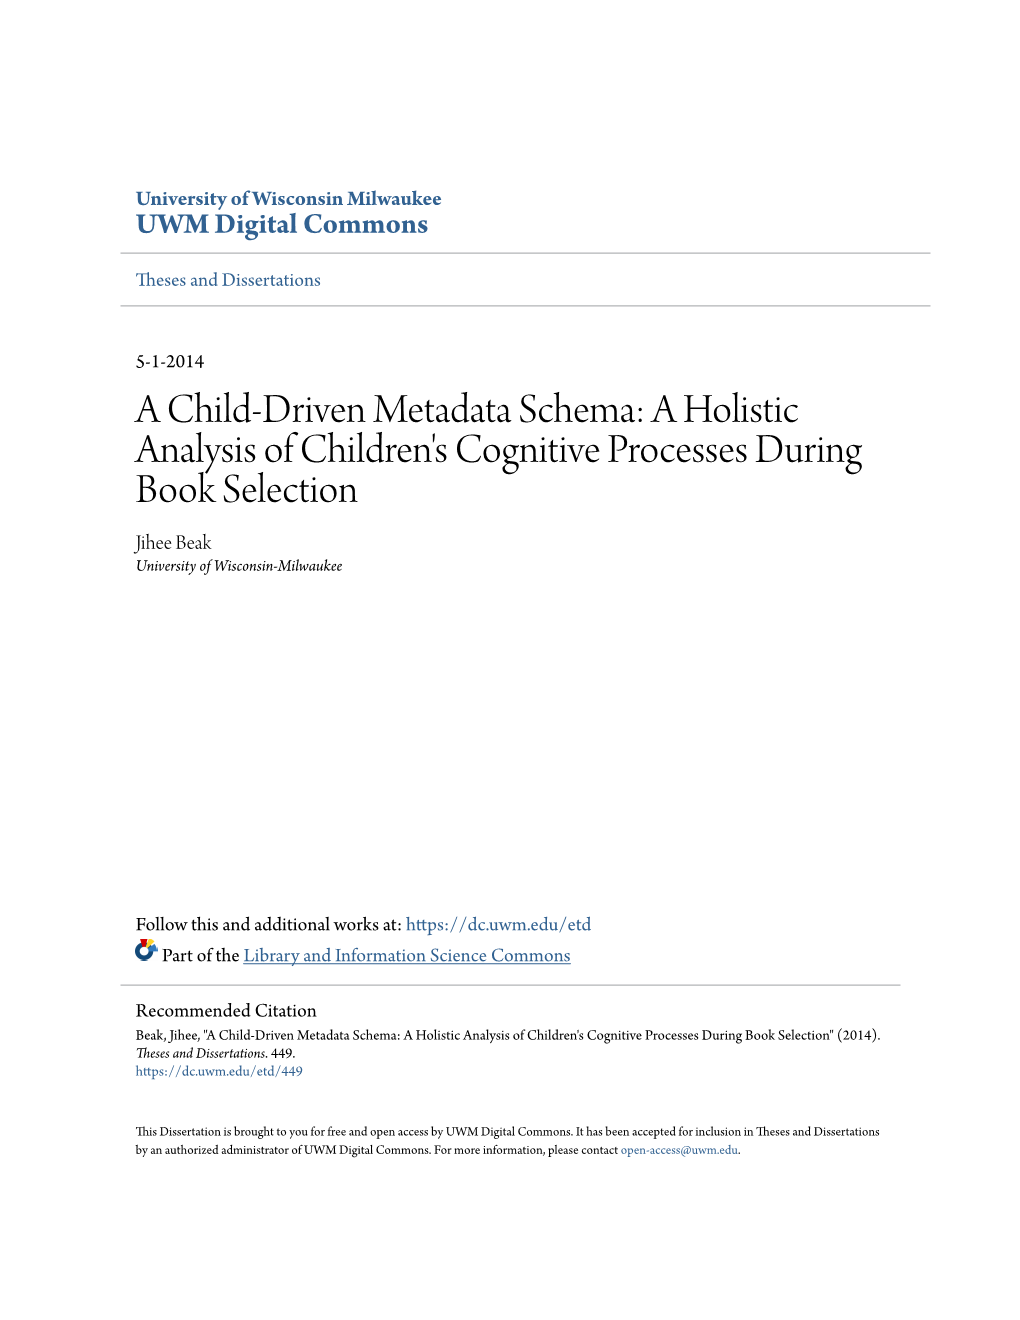 A Child-Driven Metadata Schema: a Holistic Analysis of Children's Cognitive Processes During Book Selection Jihee Beak University of Wisconsin-Milwaukee